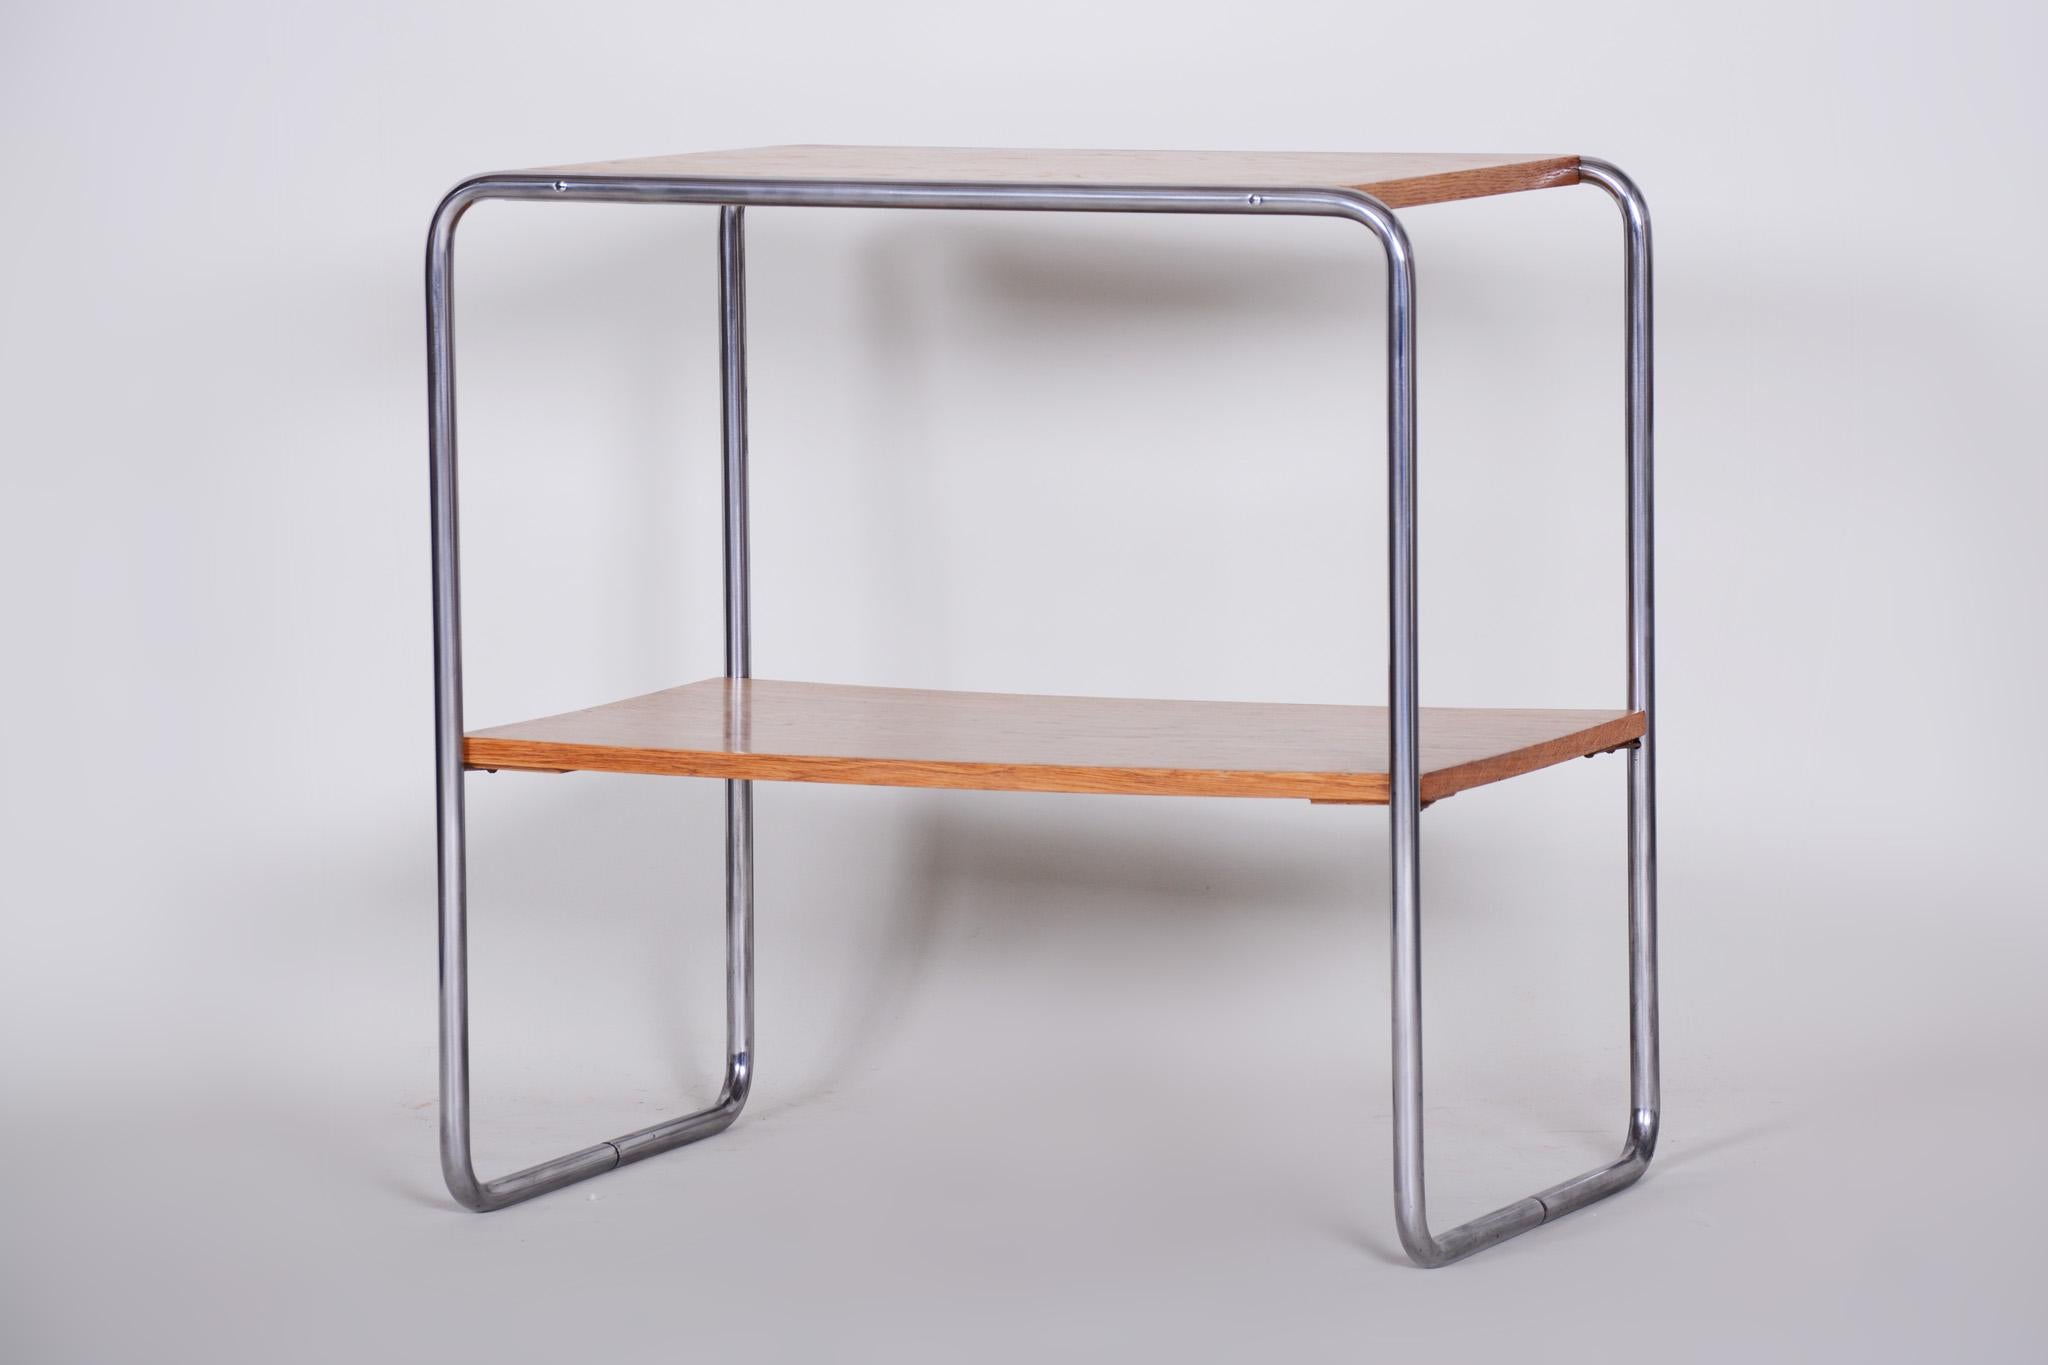 20th Century Restored Czech Bauhaus Chrome Small Table, Oakwood, 1930s In Good Condition For Sale In Horomerice, CZ